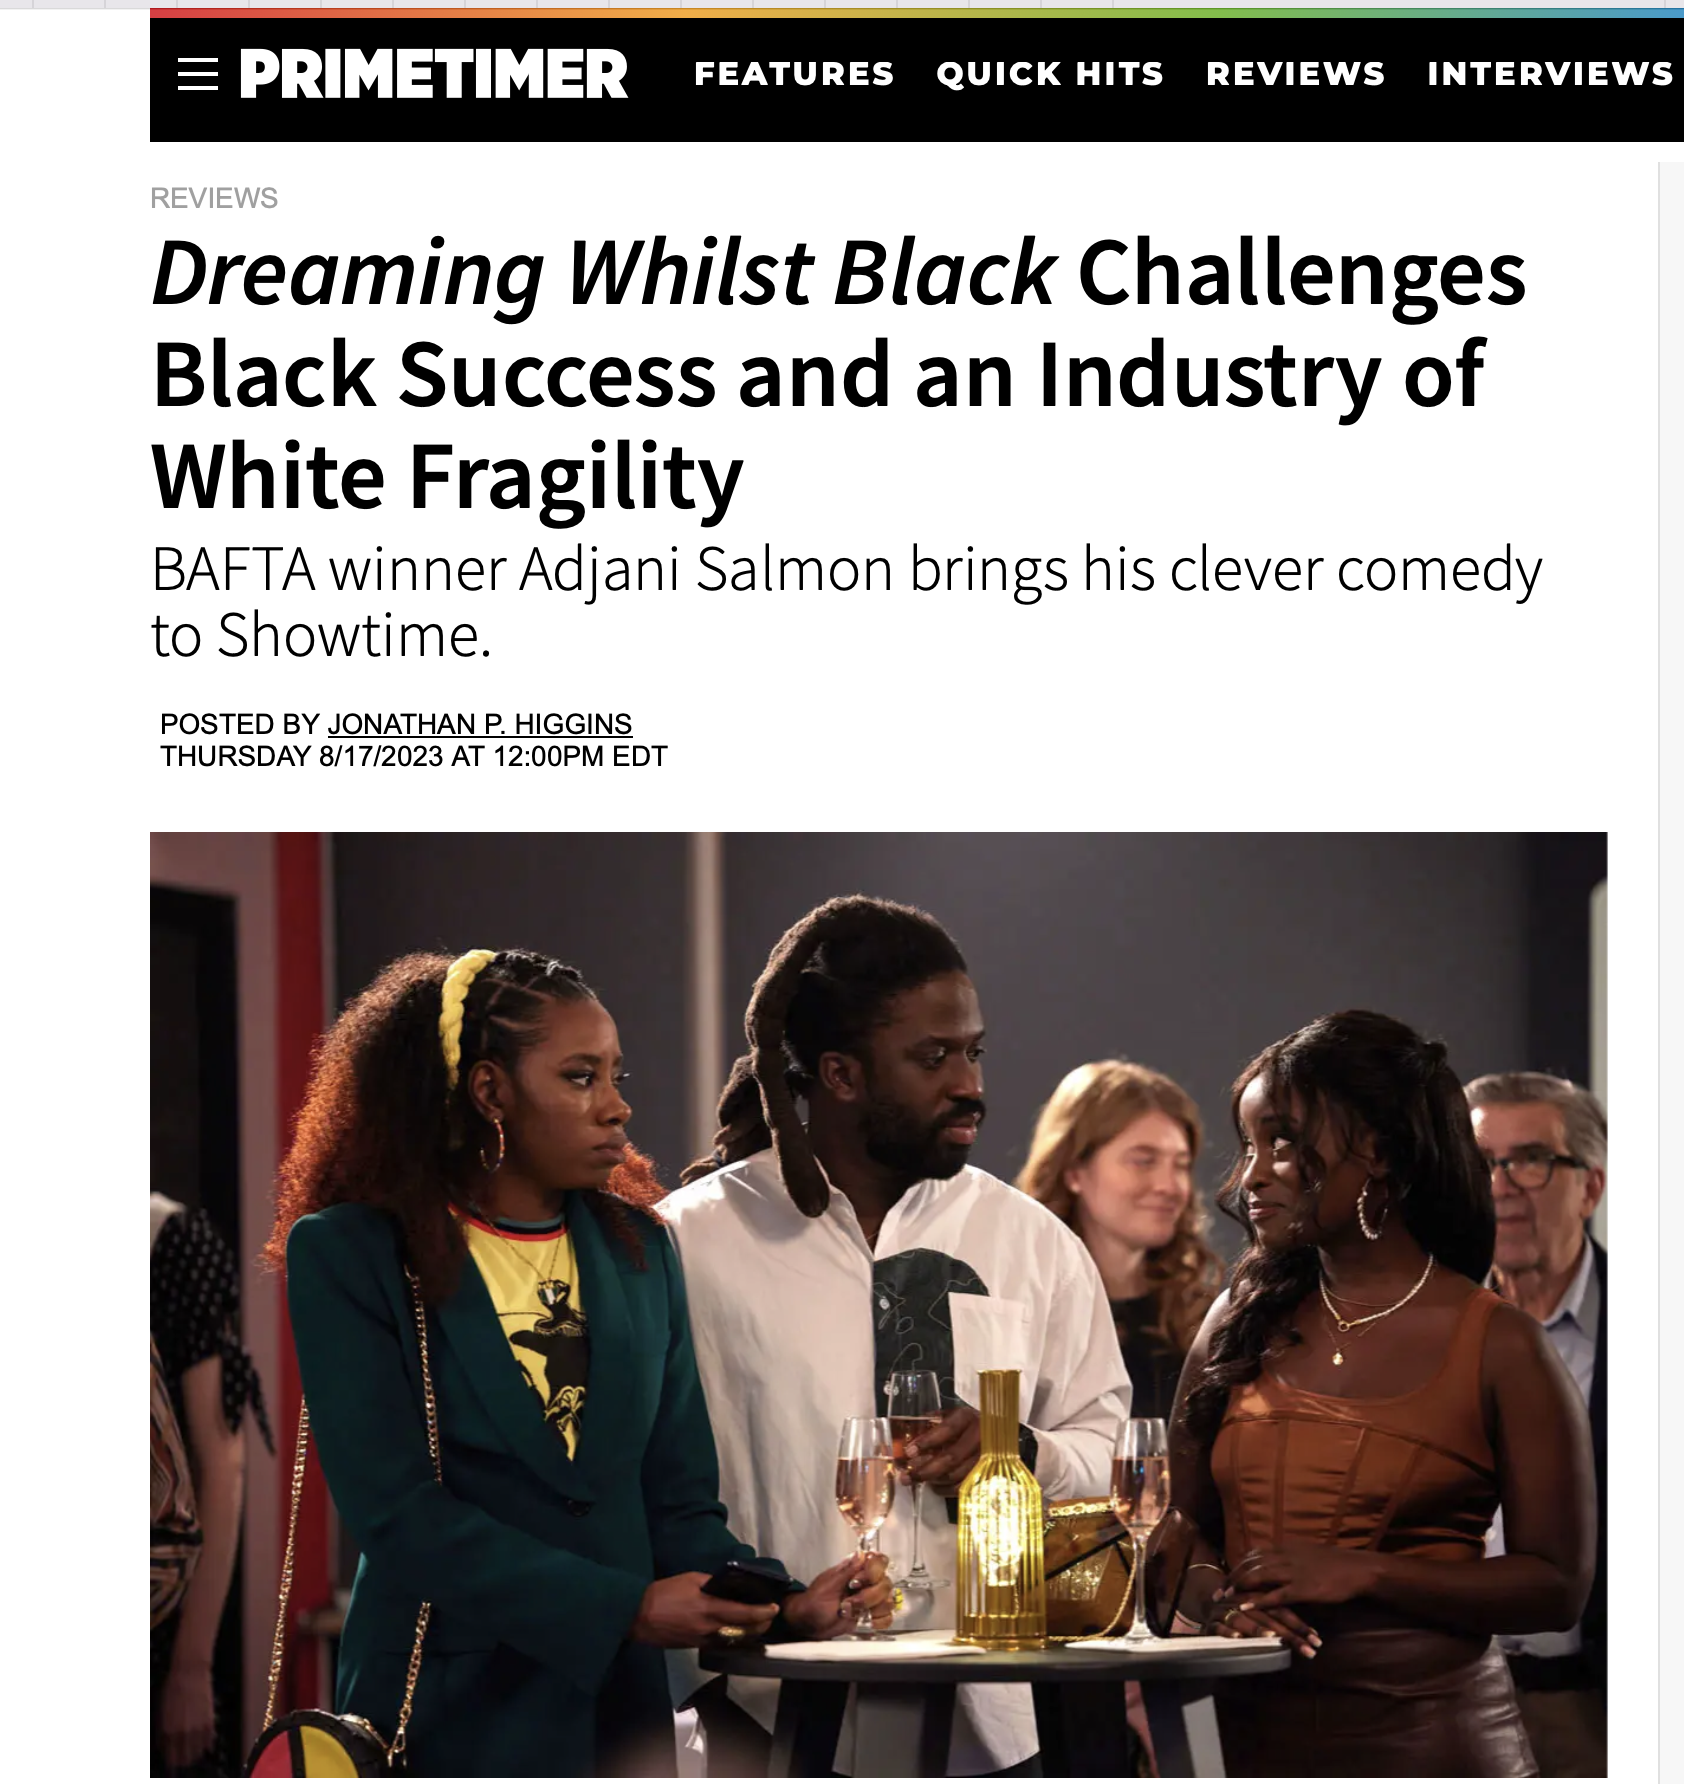 Dreaming Whilst Black Challenges Black Success and an Industry of White Fragility thumbnail